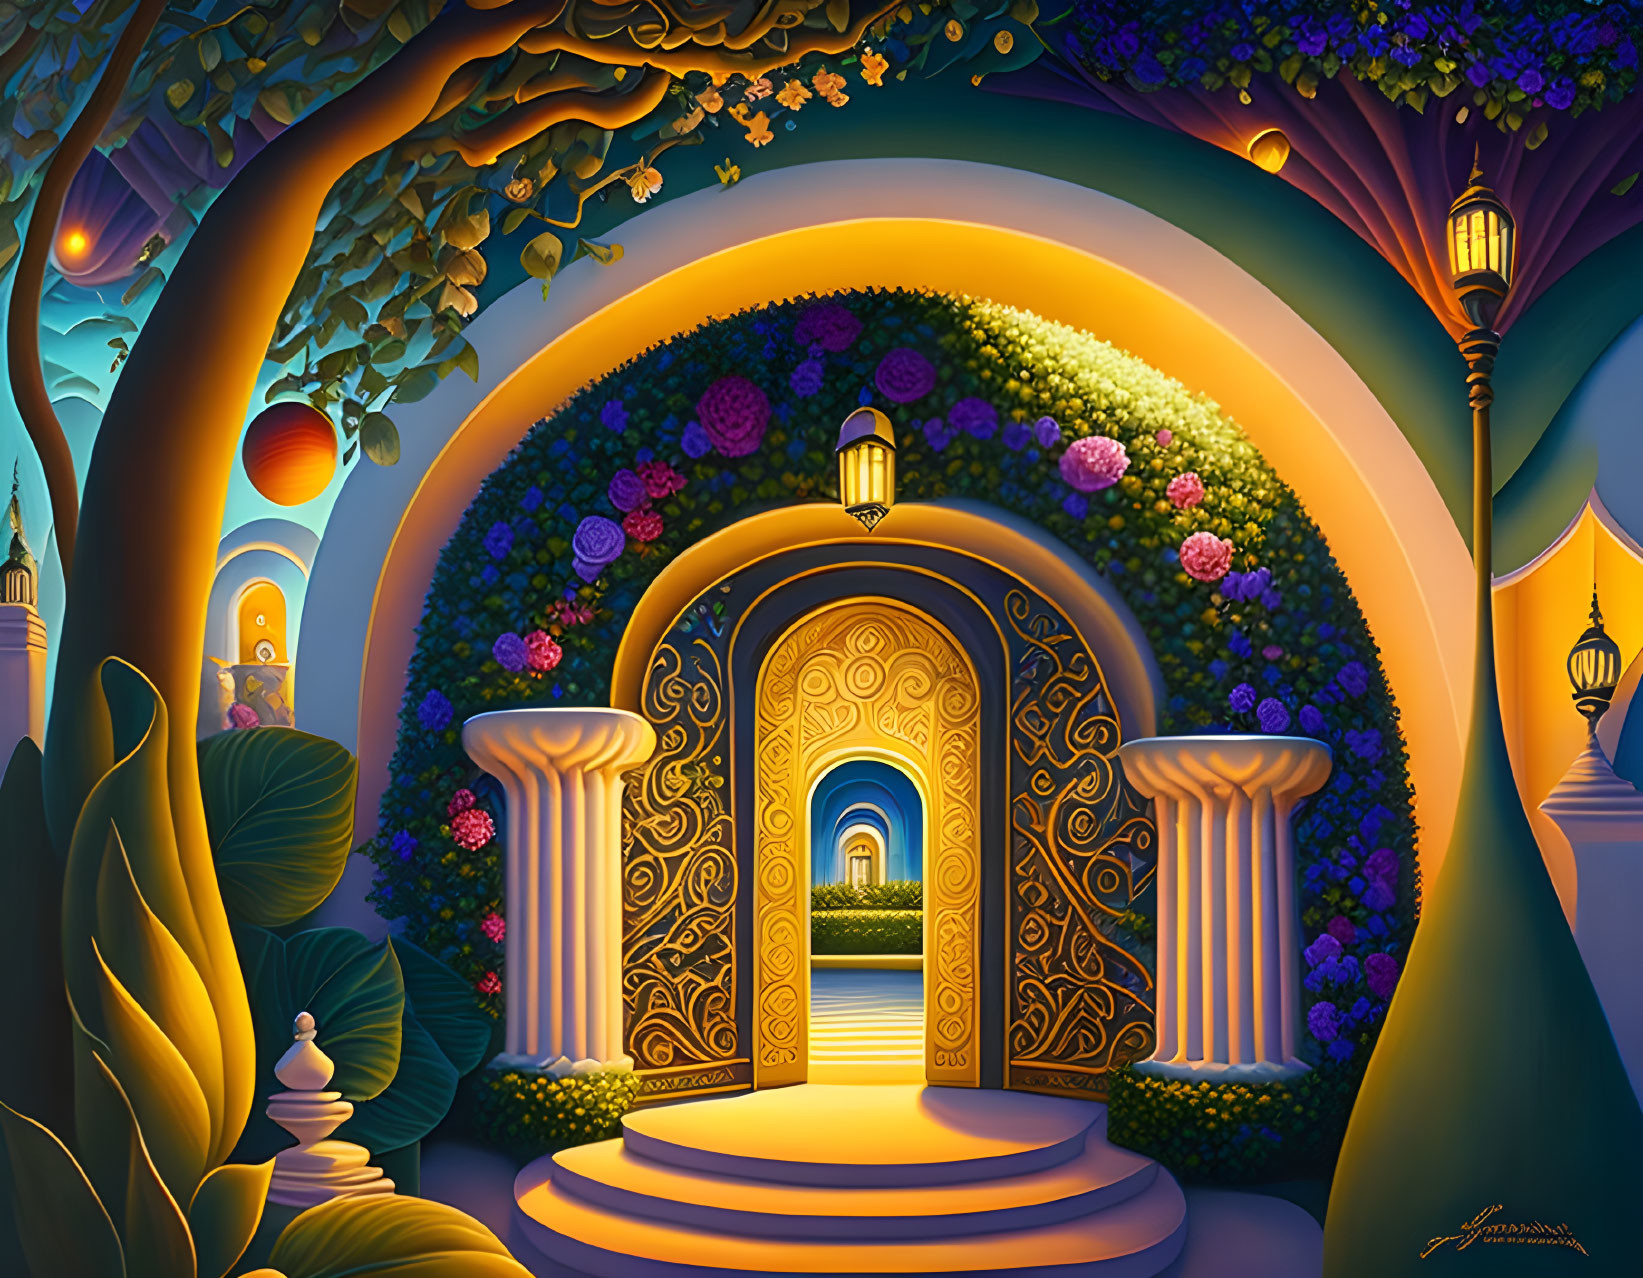 Colorful illustration: Magical doorway in lush flora under twilight sky